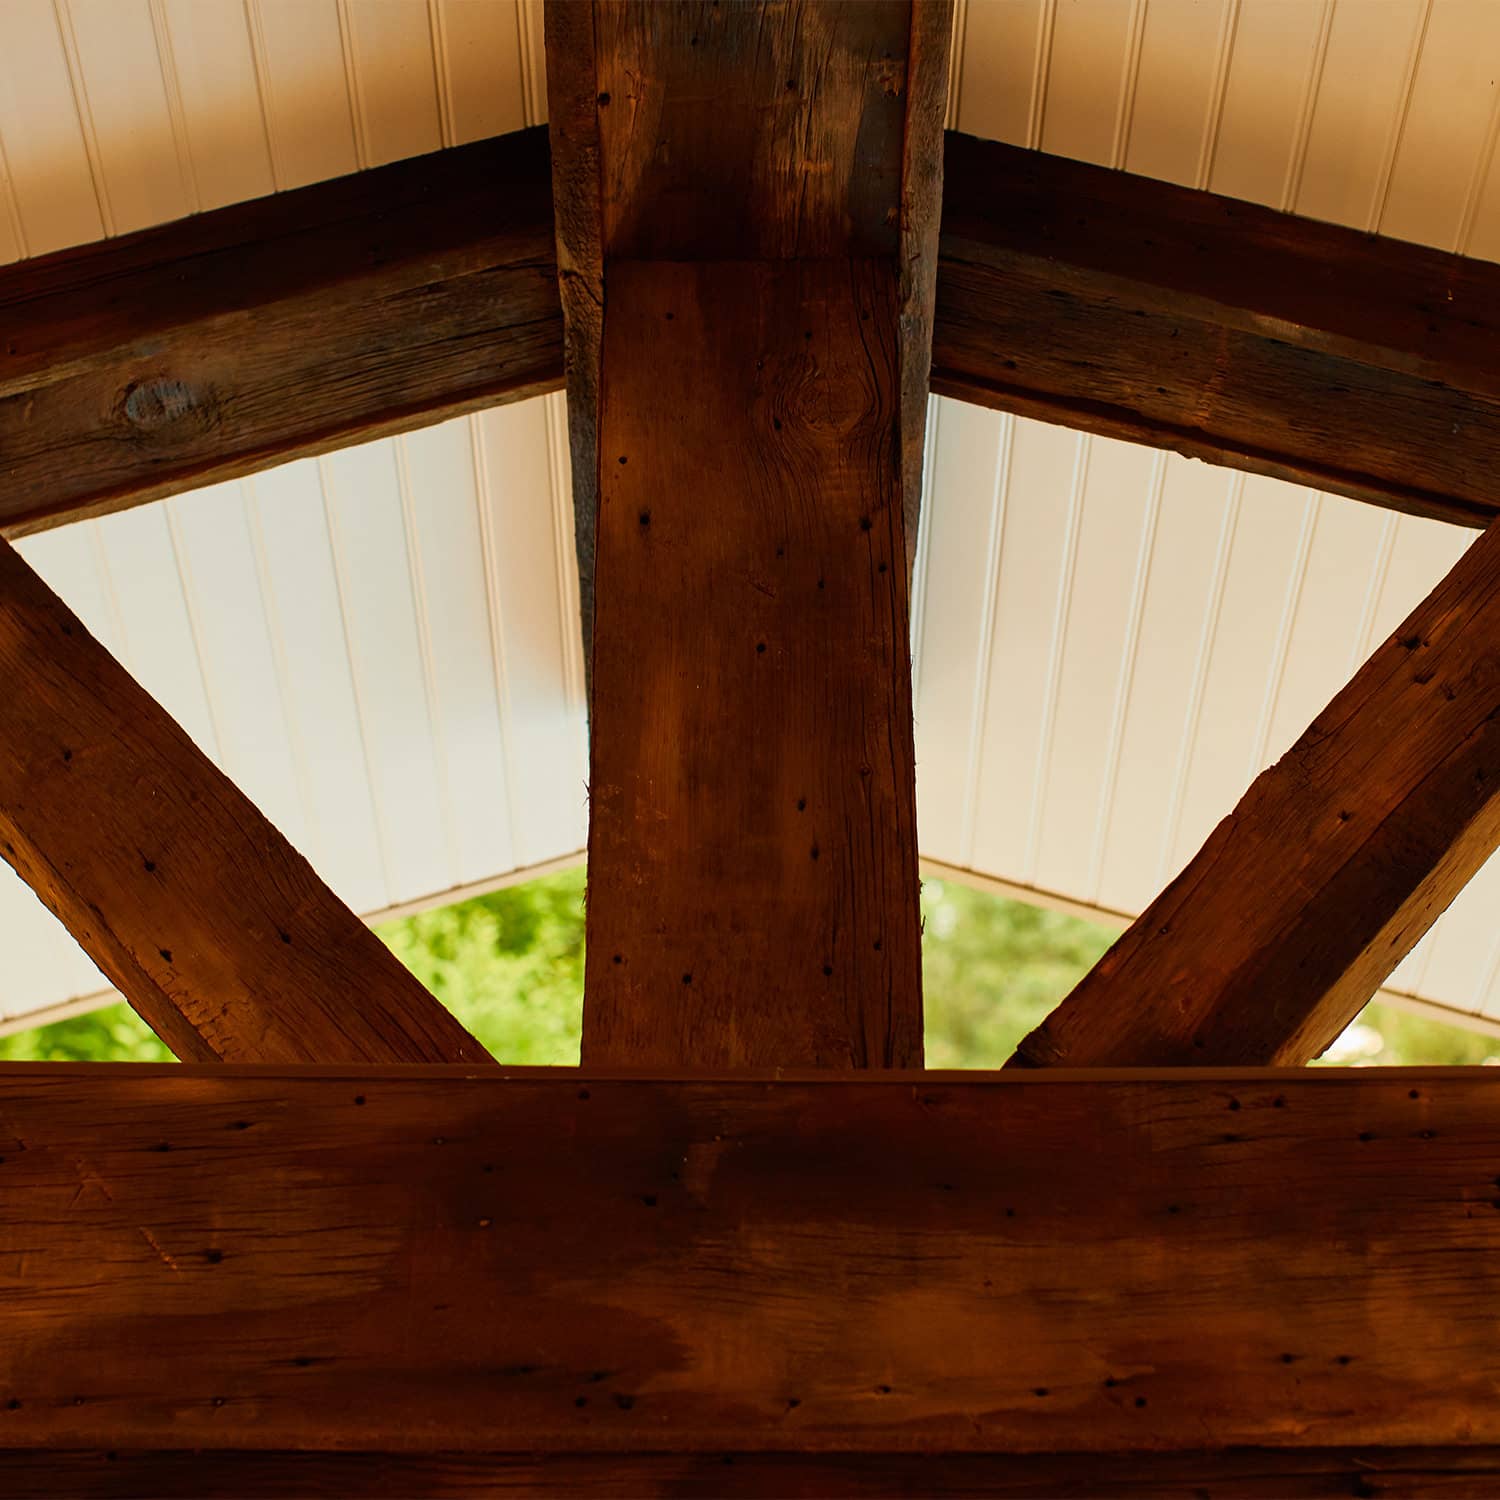 This authentic barnwood cladding shows original nail holes and wear, it’s the perfect complement to the clean roof lines. Rustic meets contemporary!